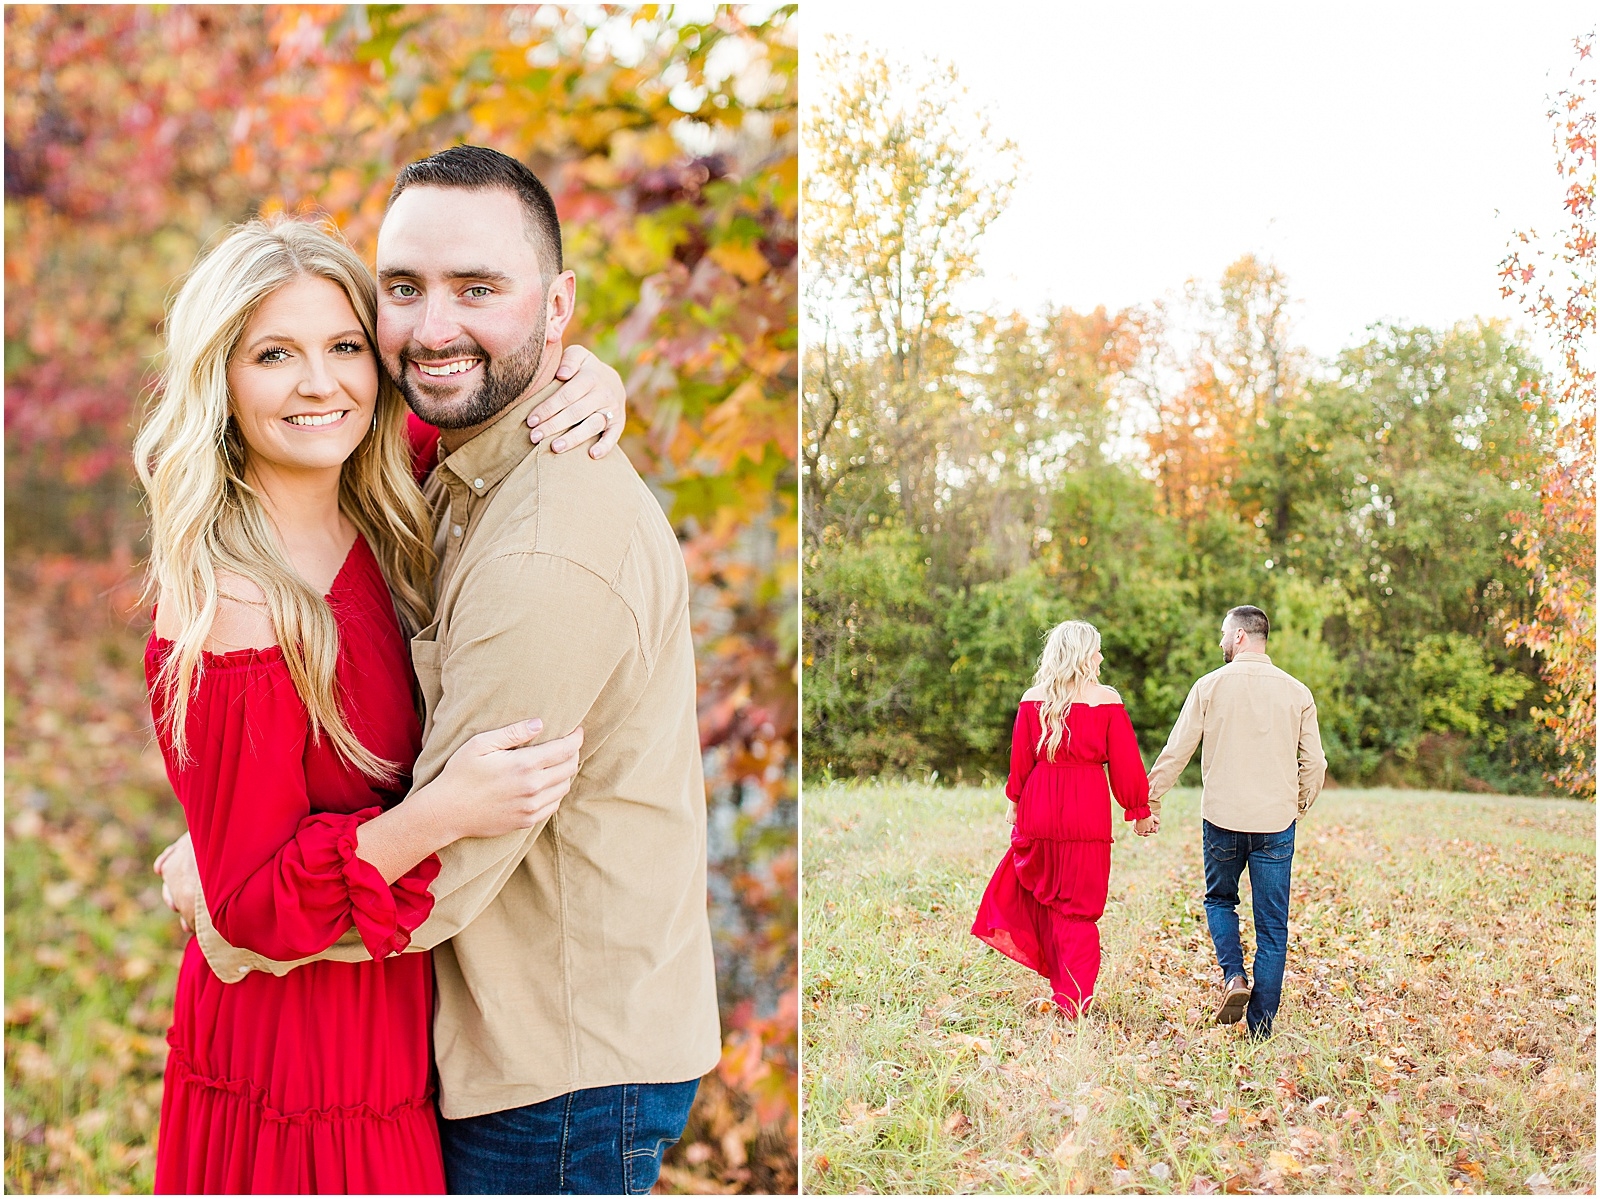 A Southern Indiana Engagement Session | Charleston and Erin | Bret and Brandie Photography037.jpg